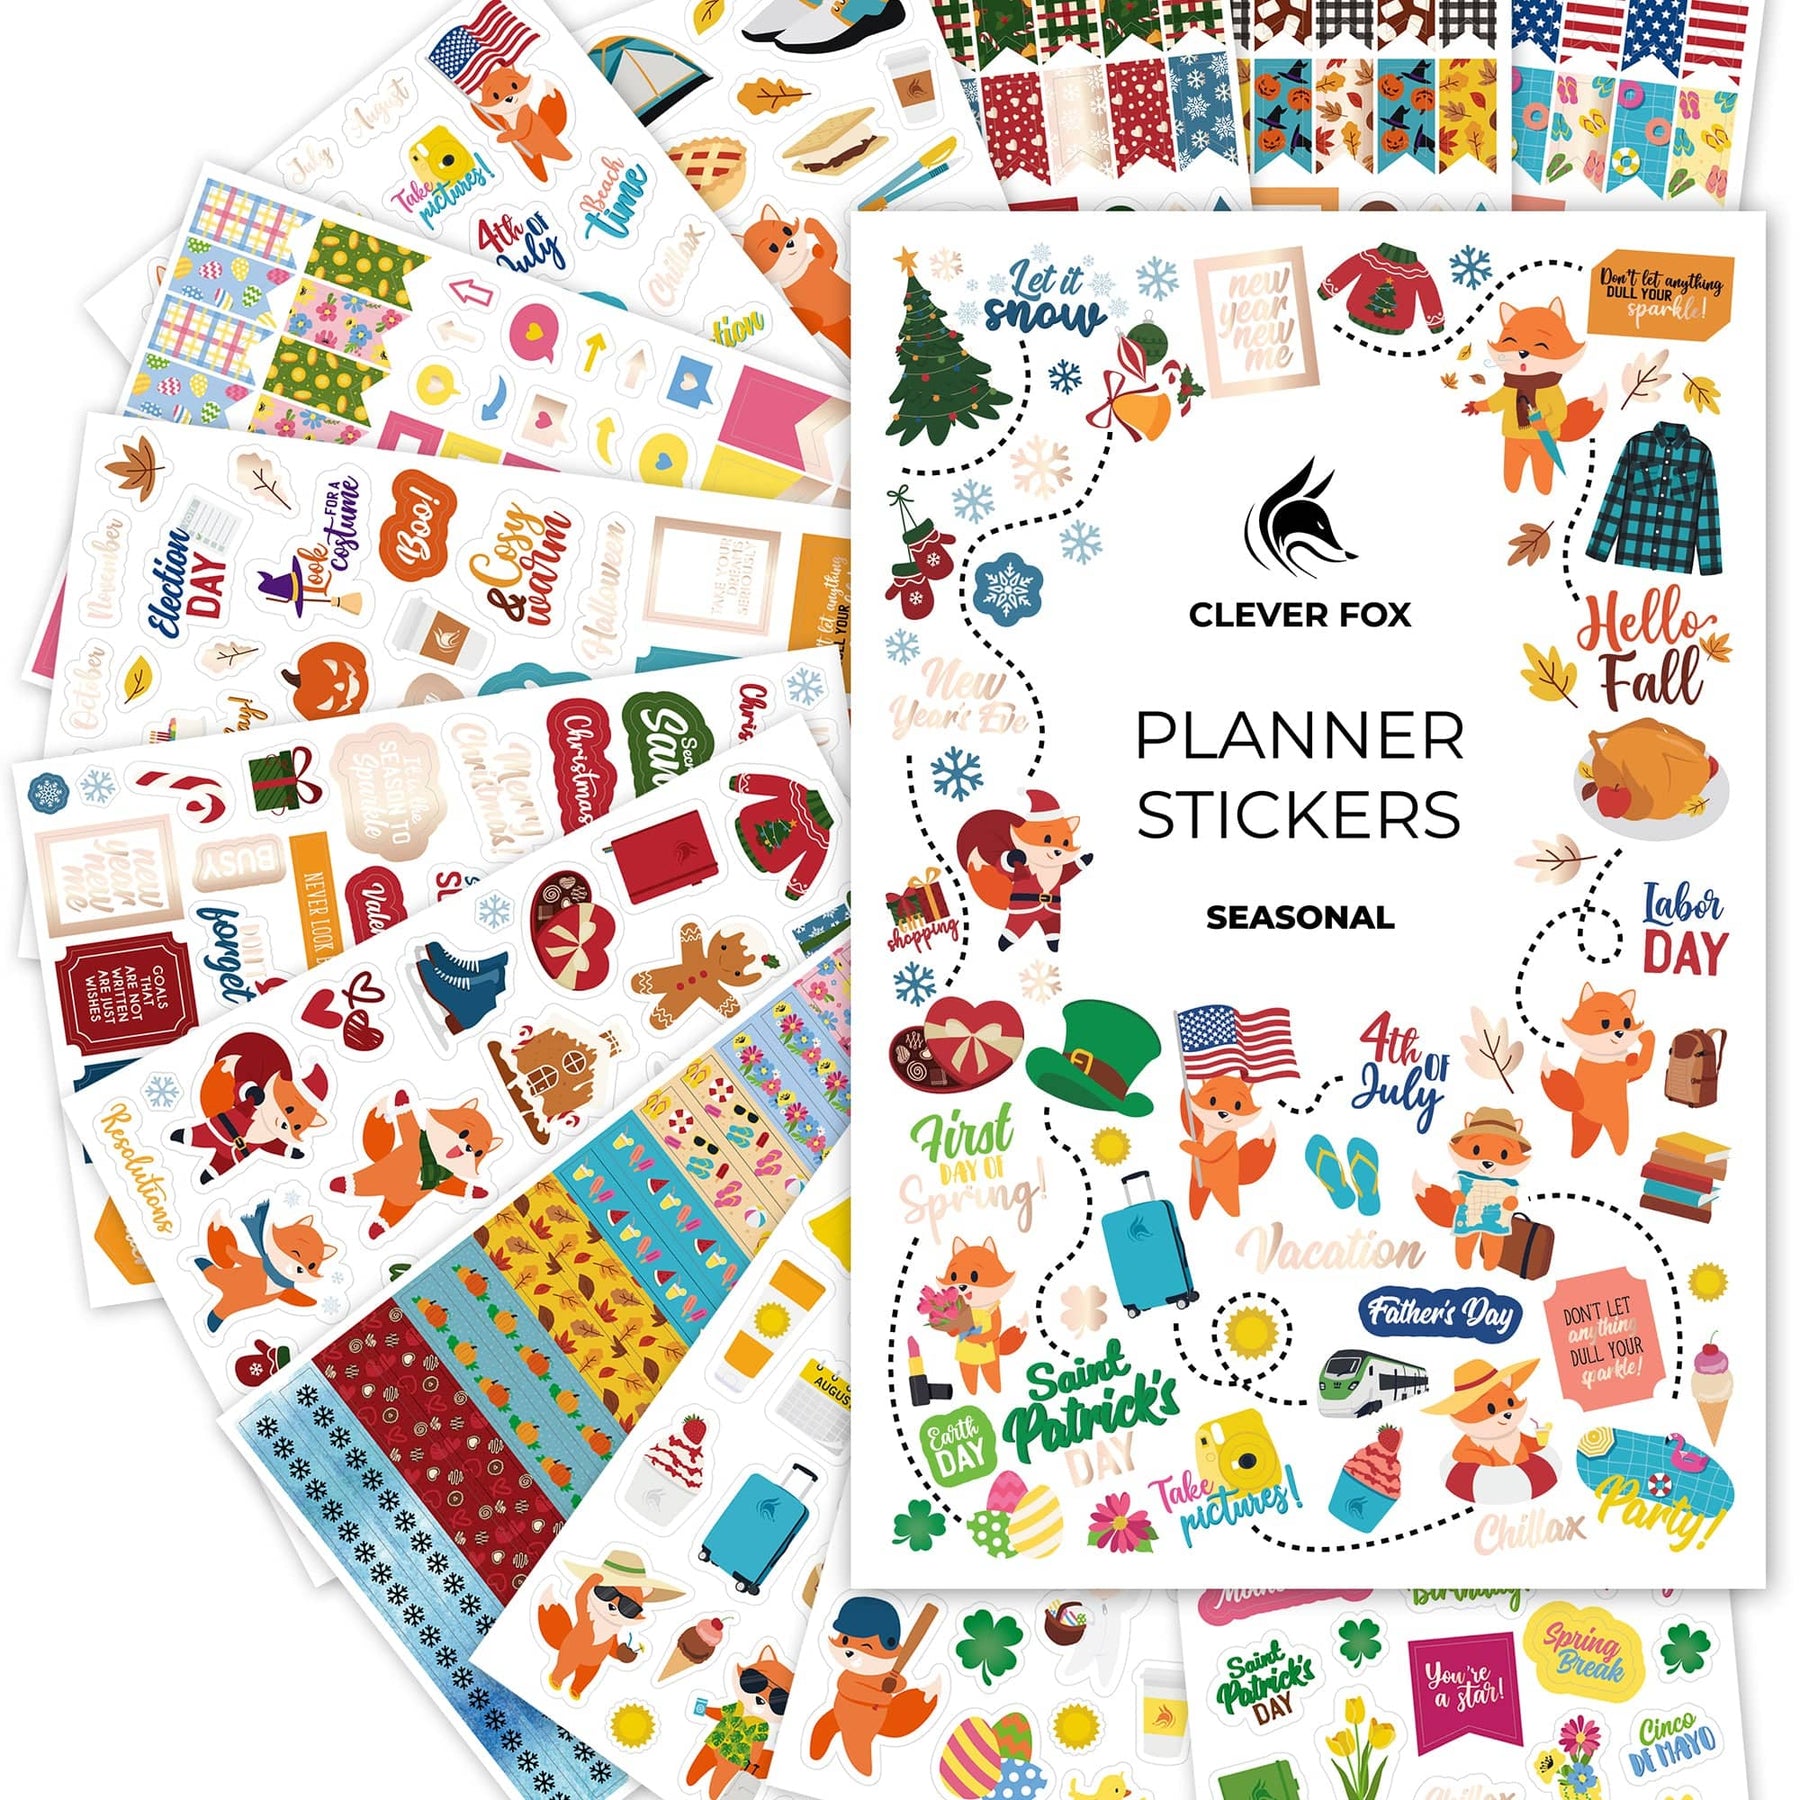 Clever Fox Seasonal Planner Stickers â€“ 600+ Month, Holiday & Seasons  Stickers for Your Planner, Monthly Journal & Calendar â€“ 18 Sheets, Set of  Stickers & Washi Tape by Clever Fox (Season 